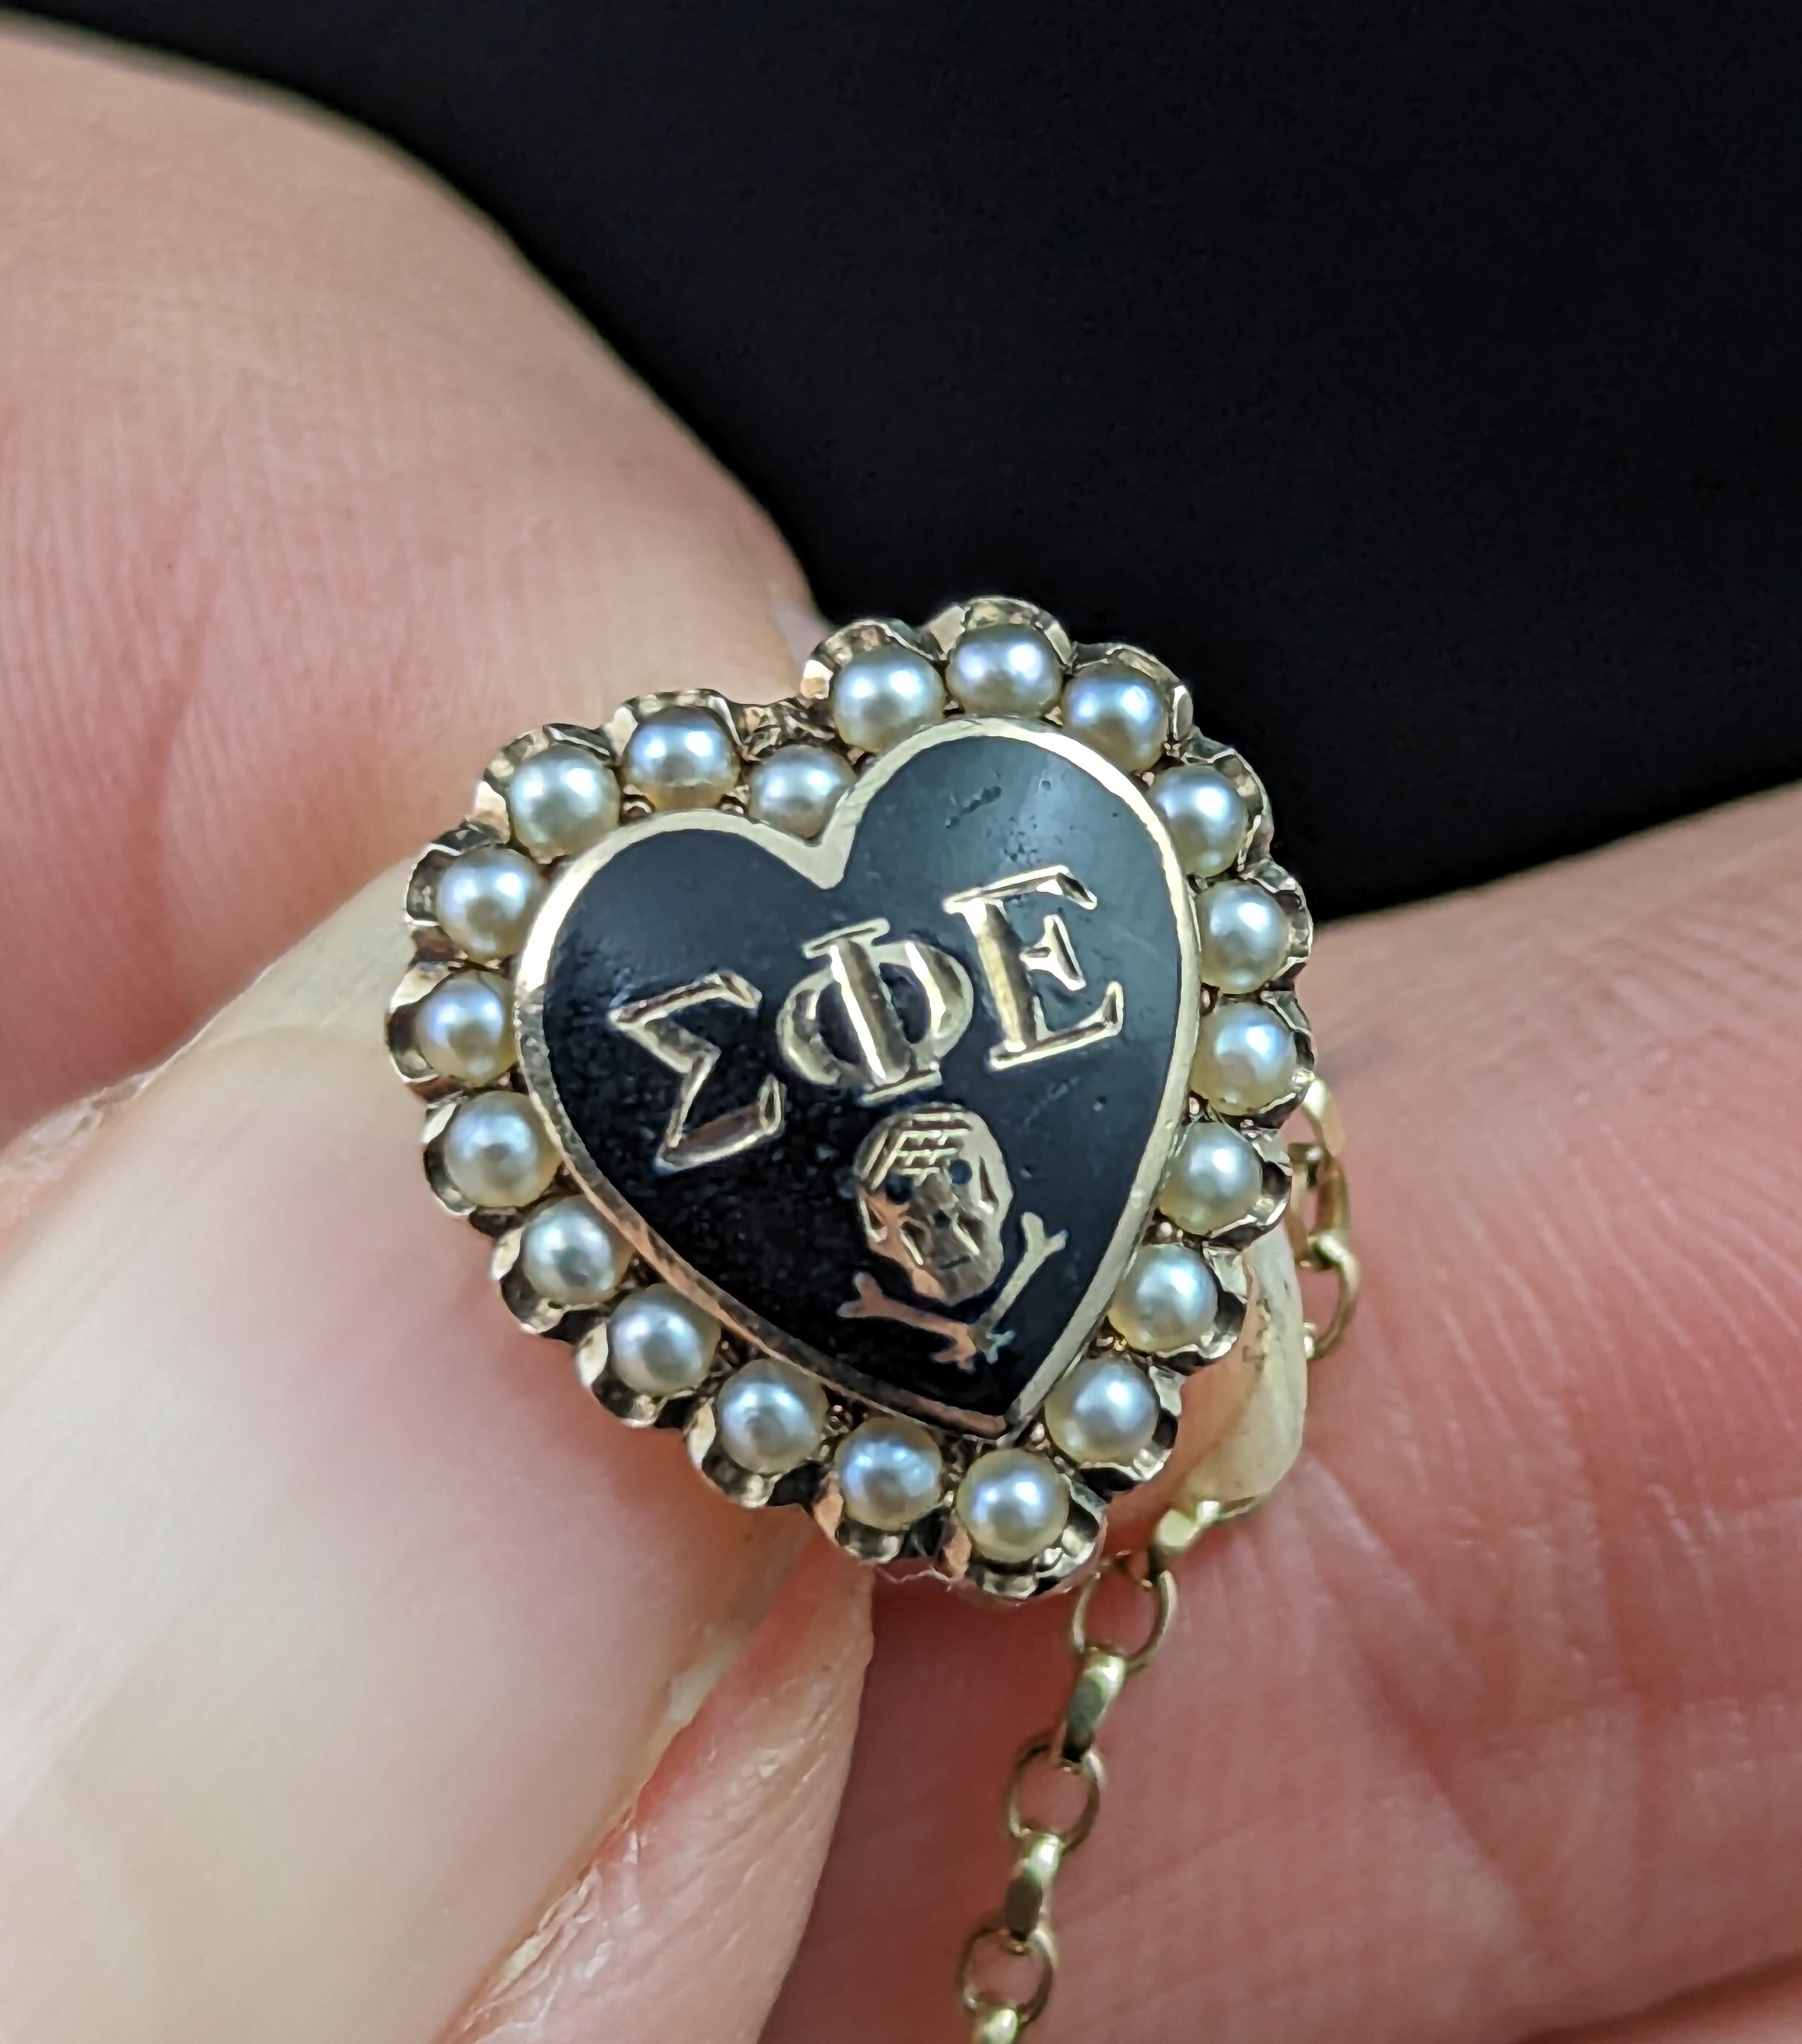 Vintage Fraternity brooch, Heart, Skull and Crossbones, 10k gold and Pearl  4